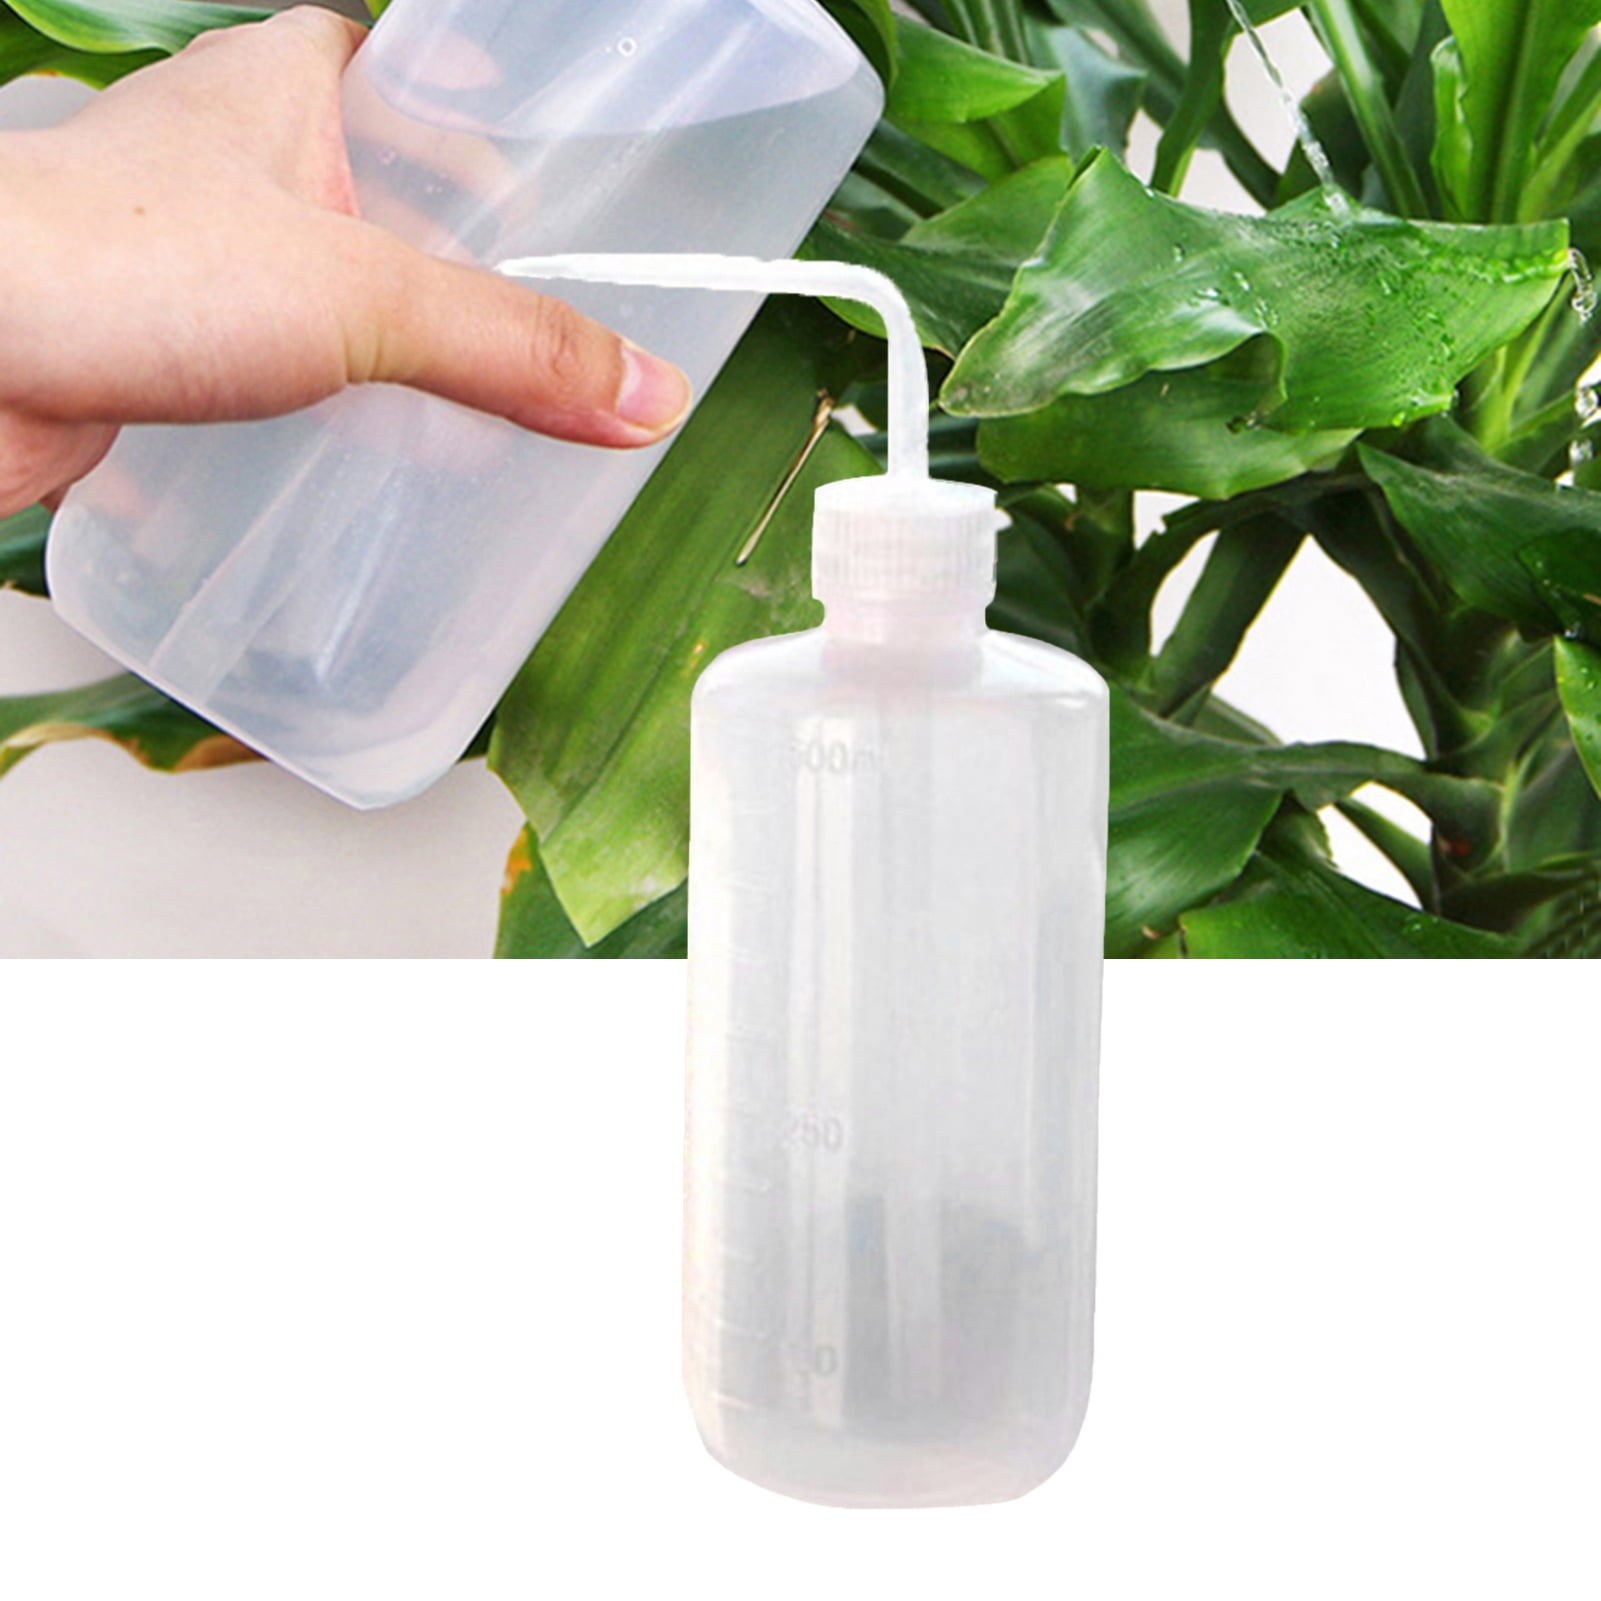 Flower Watering Bottle Squeeze Wate Type Sprayer Succulent Tool 500 250 ml White 